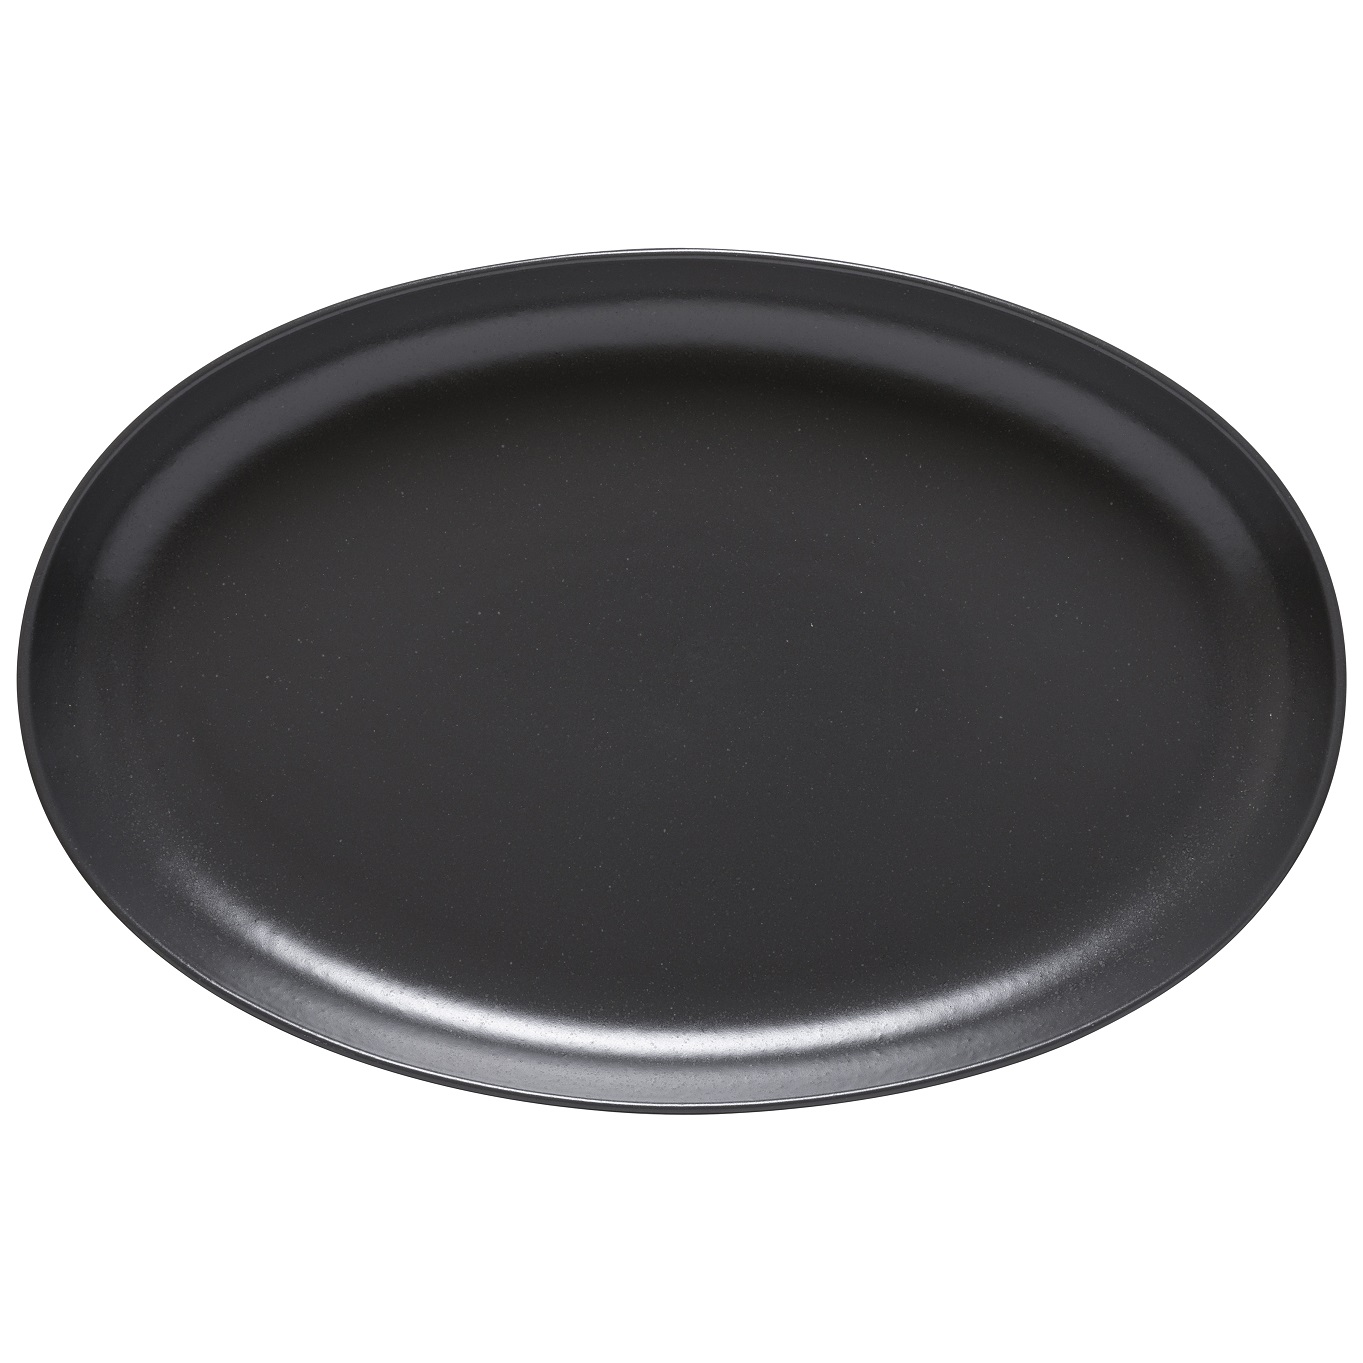 Pacifica Seed Grey Oval Platter 40.8cm Gift